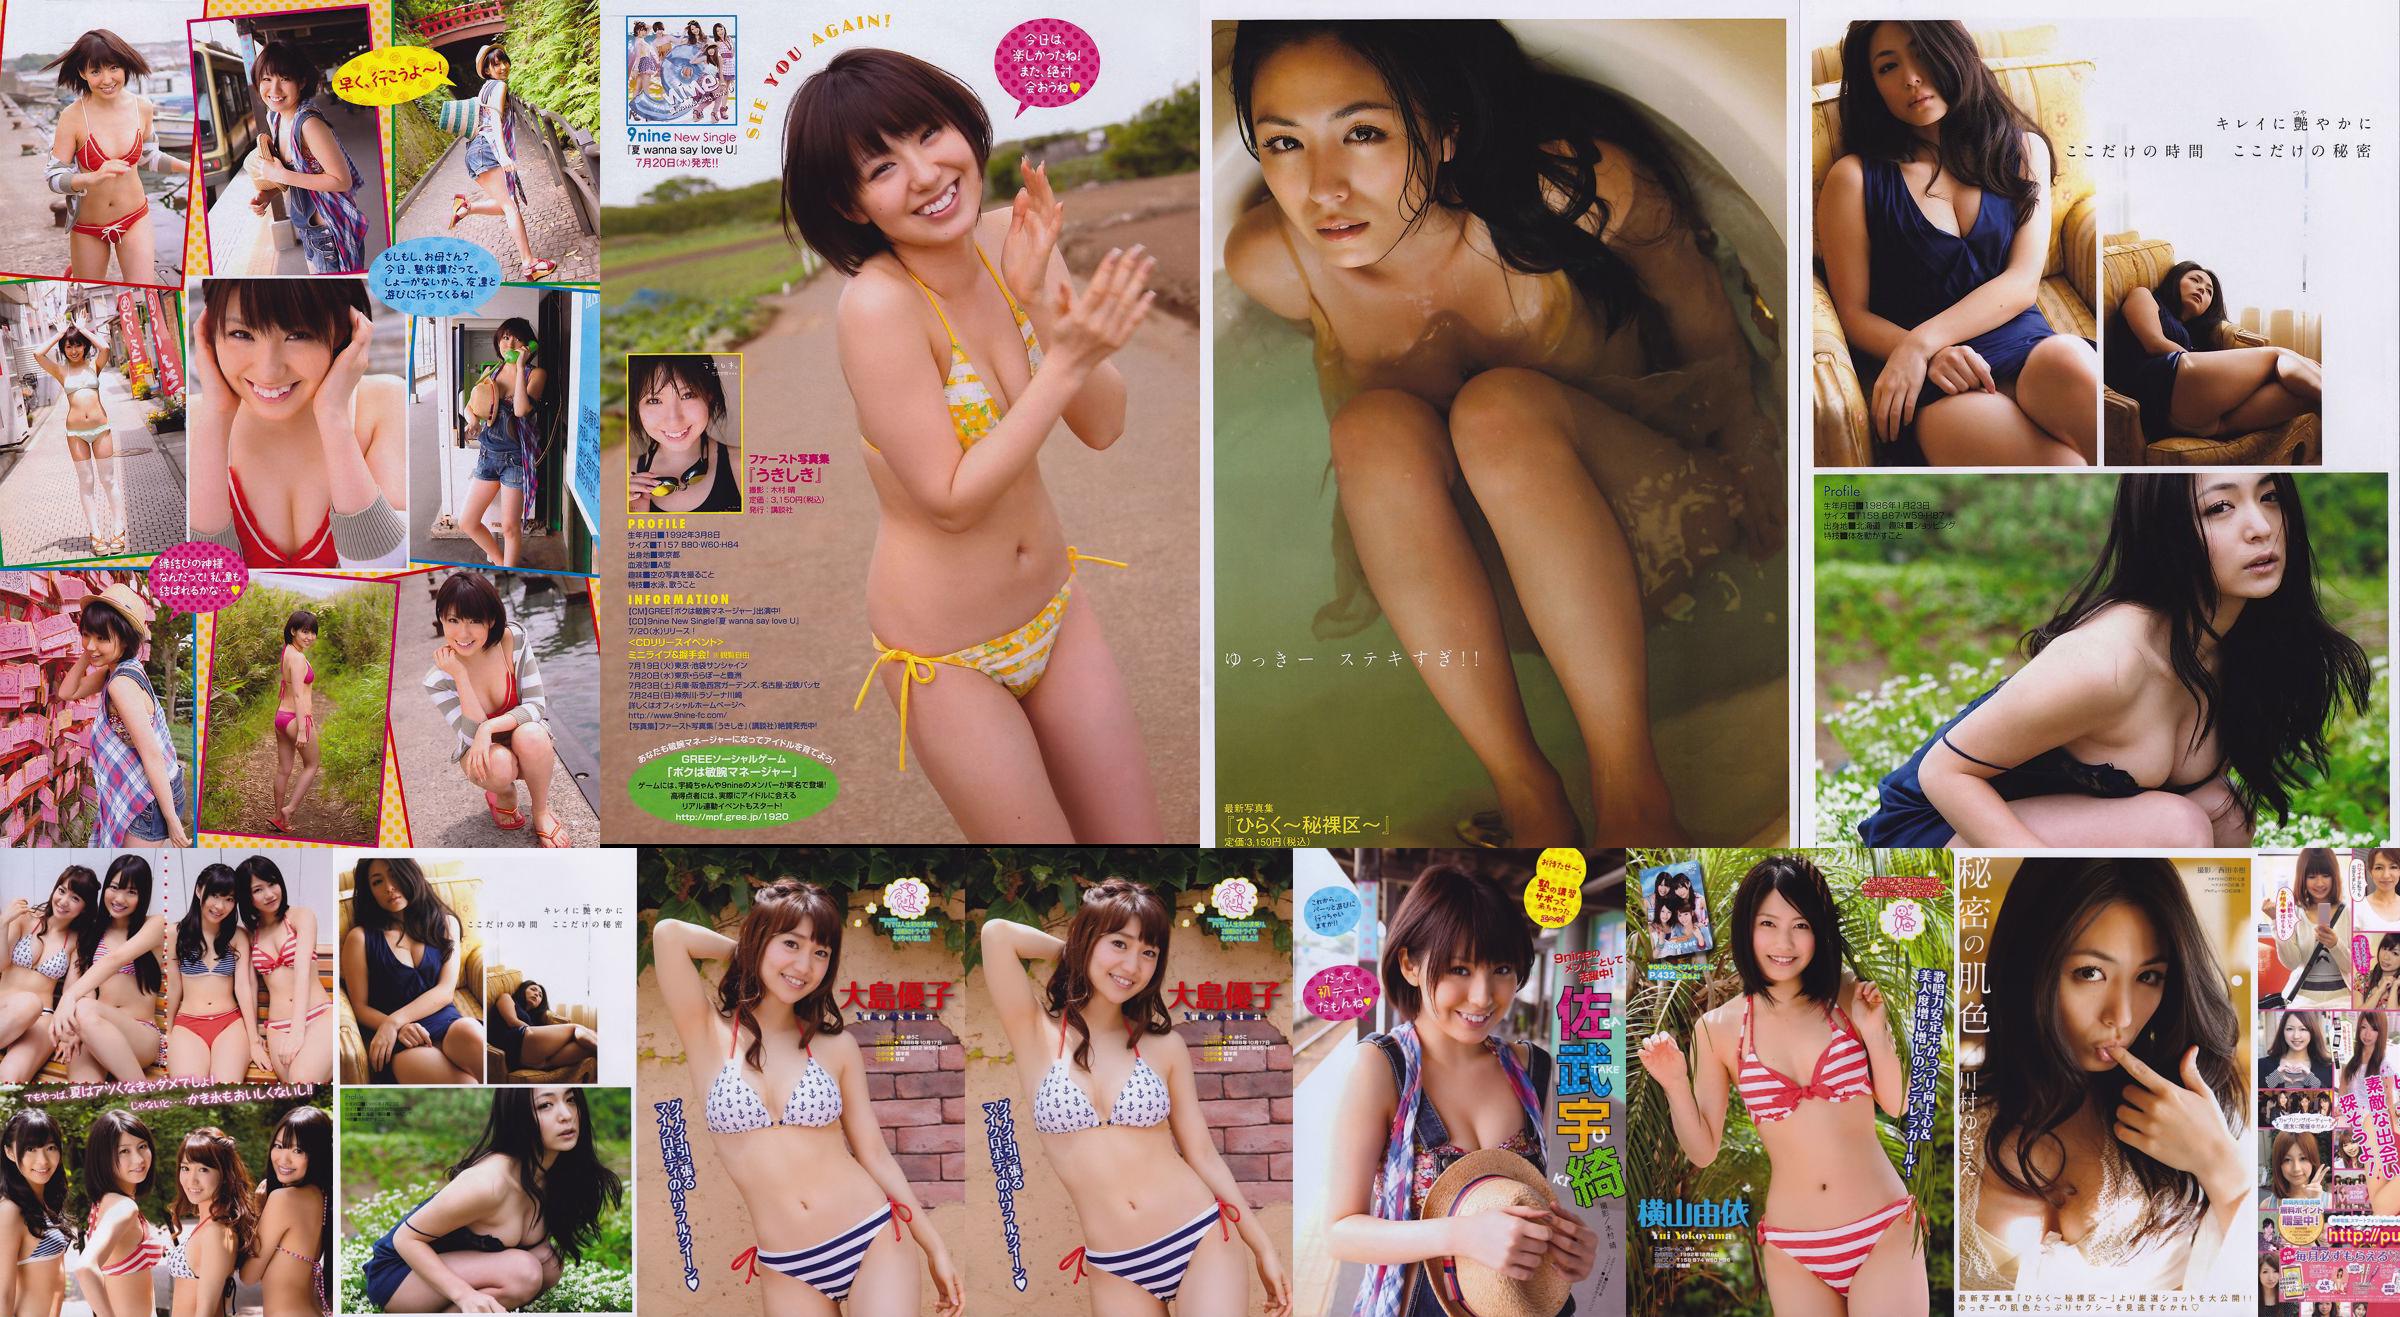 [Young Magazine] Not yet 川村ゆきえ 佐武宇綺 2011年No.32 写真杂志 No.a2ae10 第4页